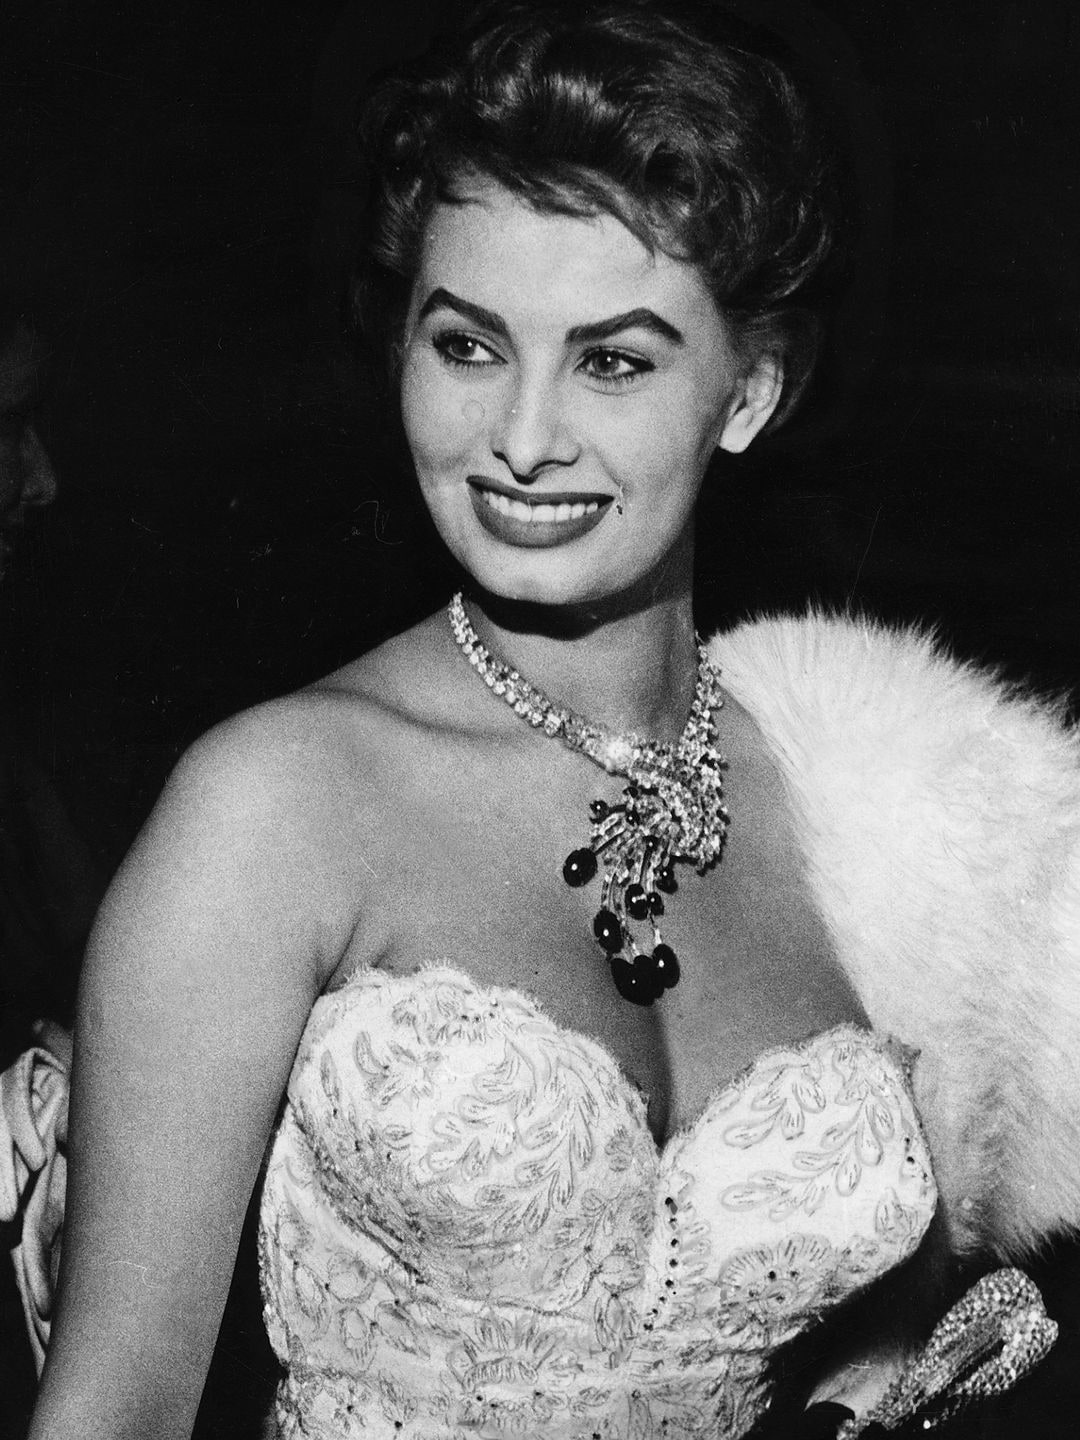 Sophia Loren wearing a strapless corset dress with a decadent necklace 